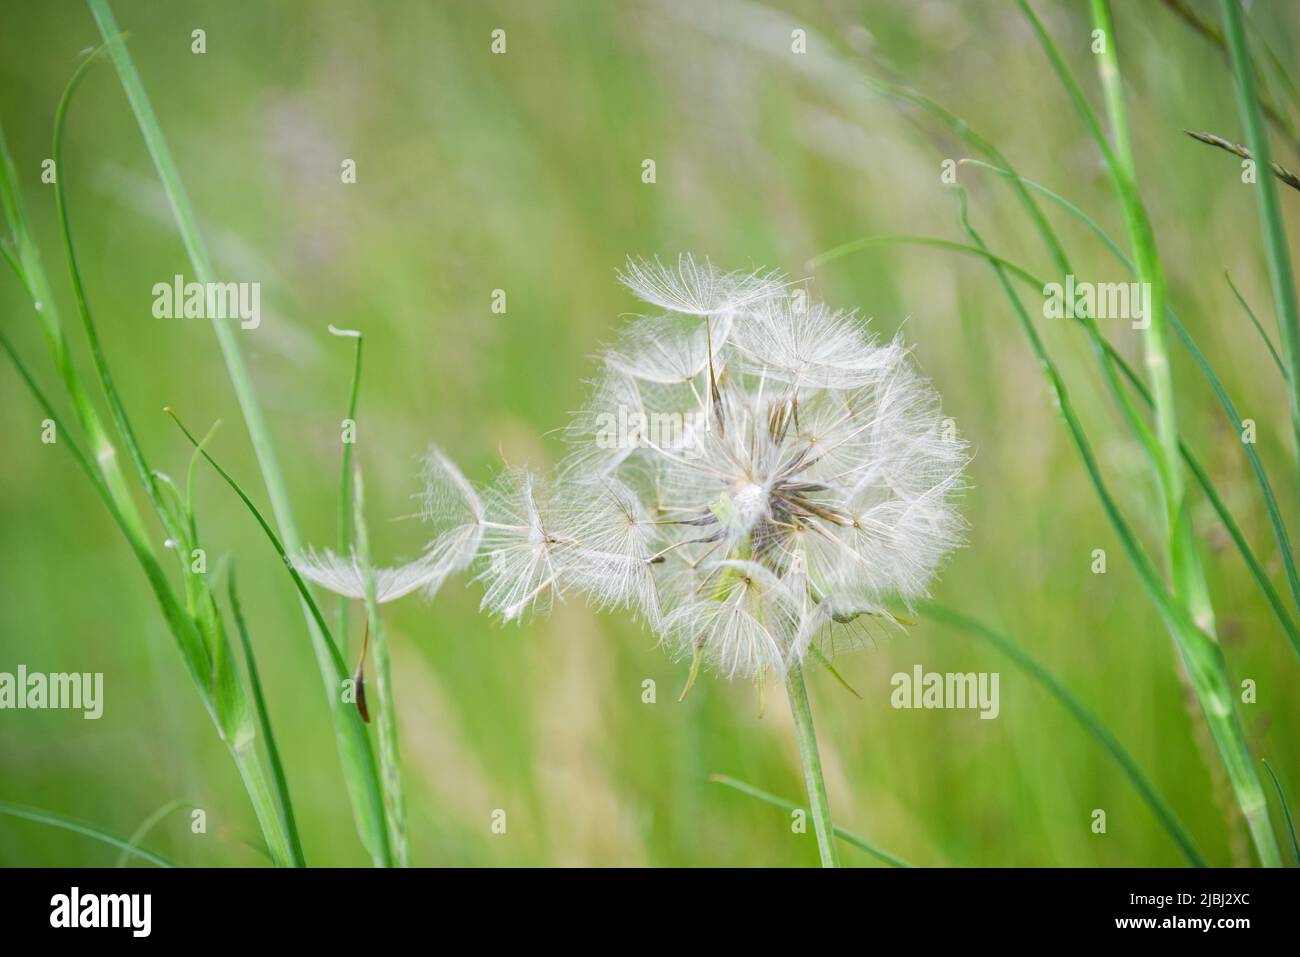 Dandelion seeds blowing from the plant with green meadow background Stock Photo